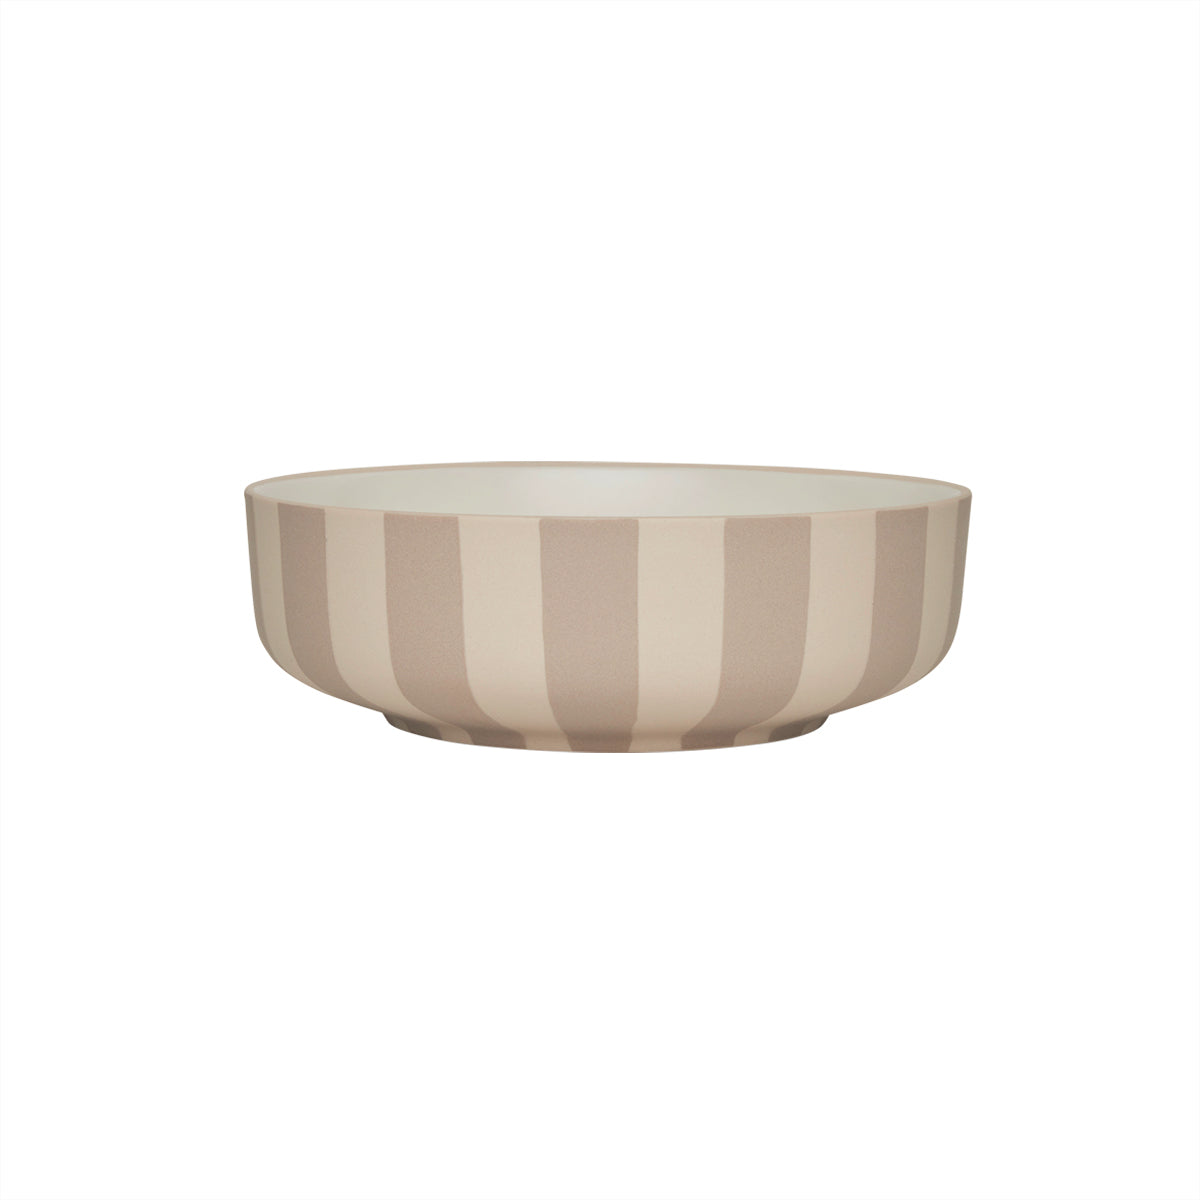 OYOY LIVING Toppu Bowl - Large Dining Ware